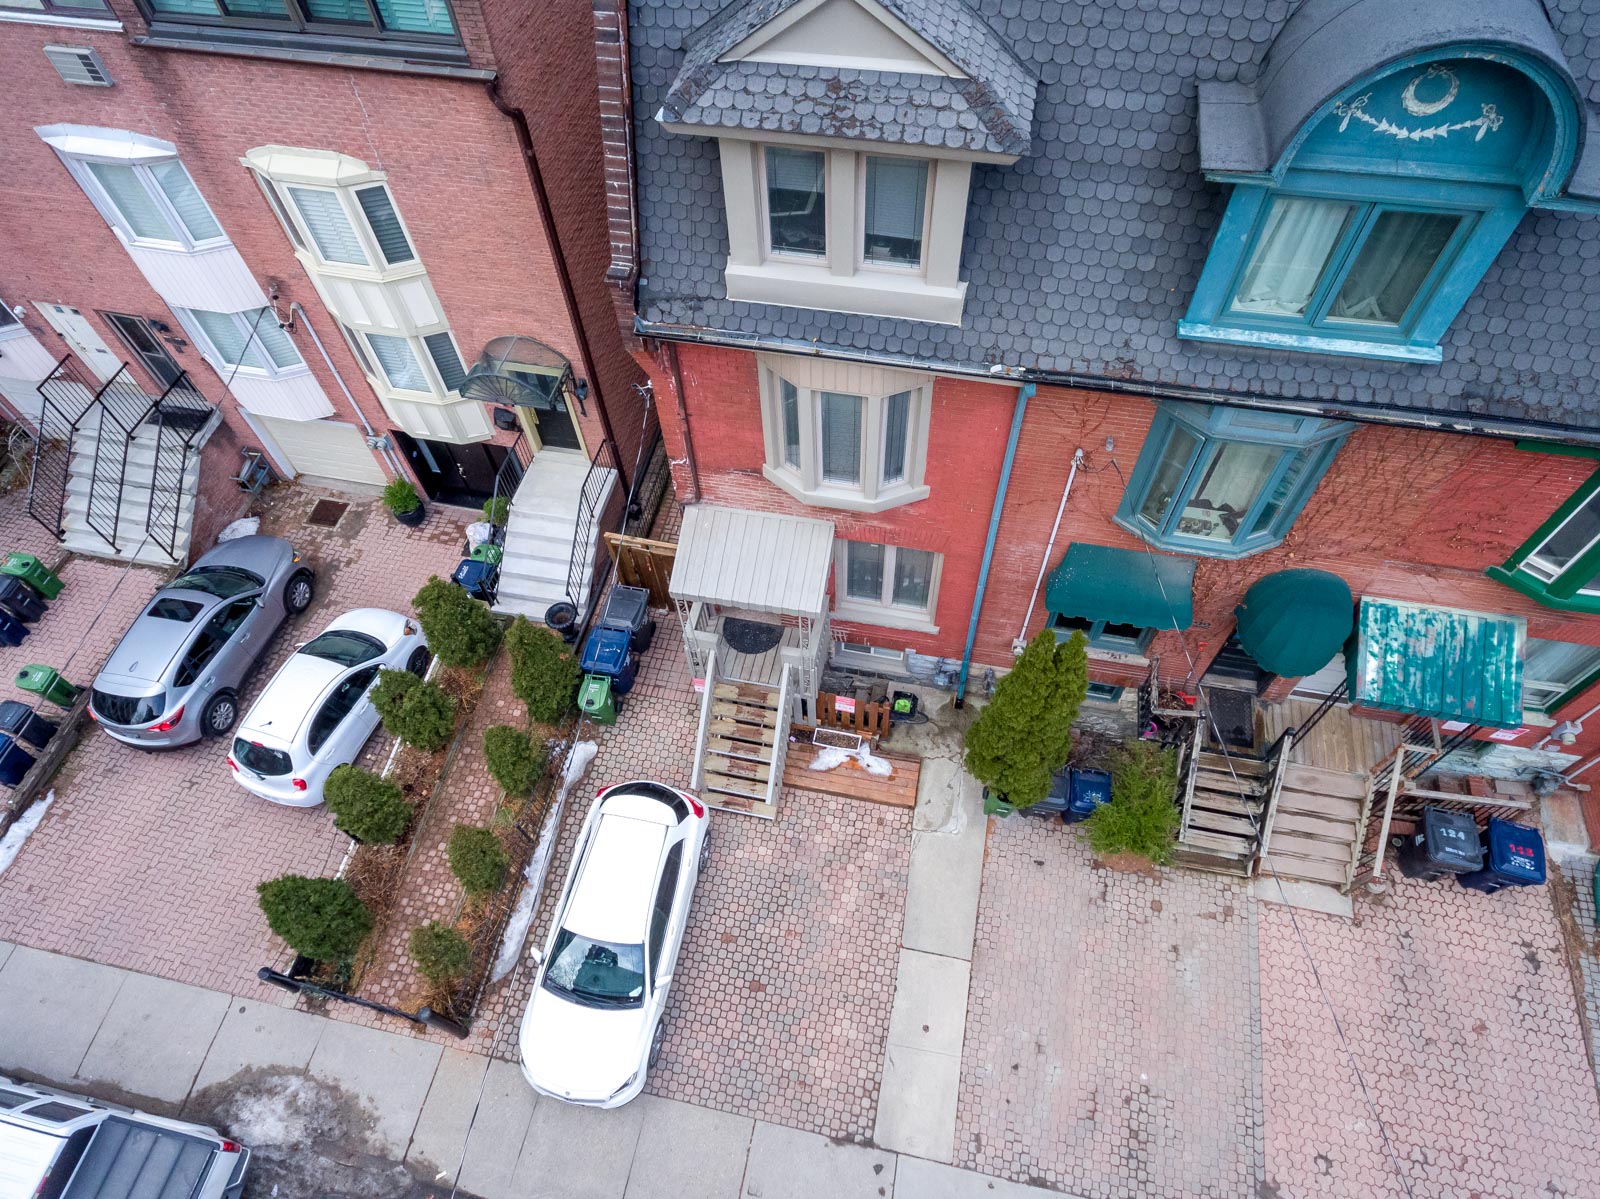 Drone photo of 120 McGill St, a red-brick Victorian house.